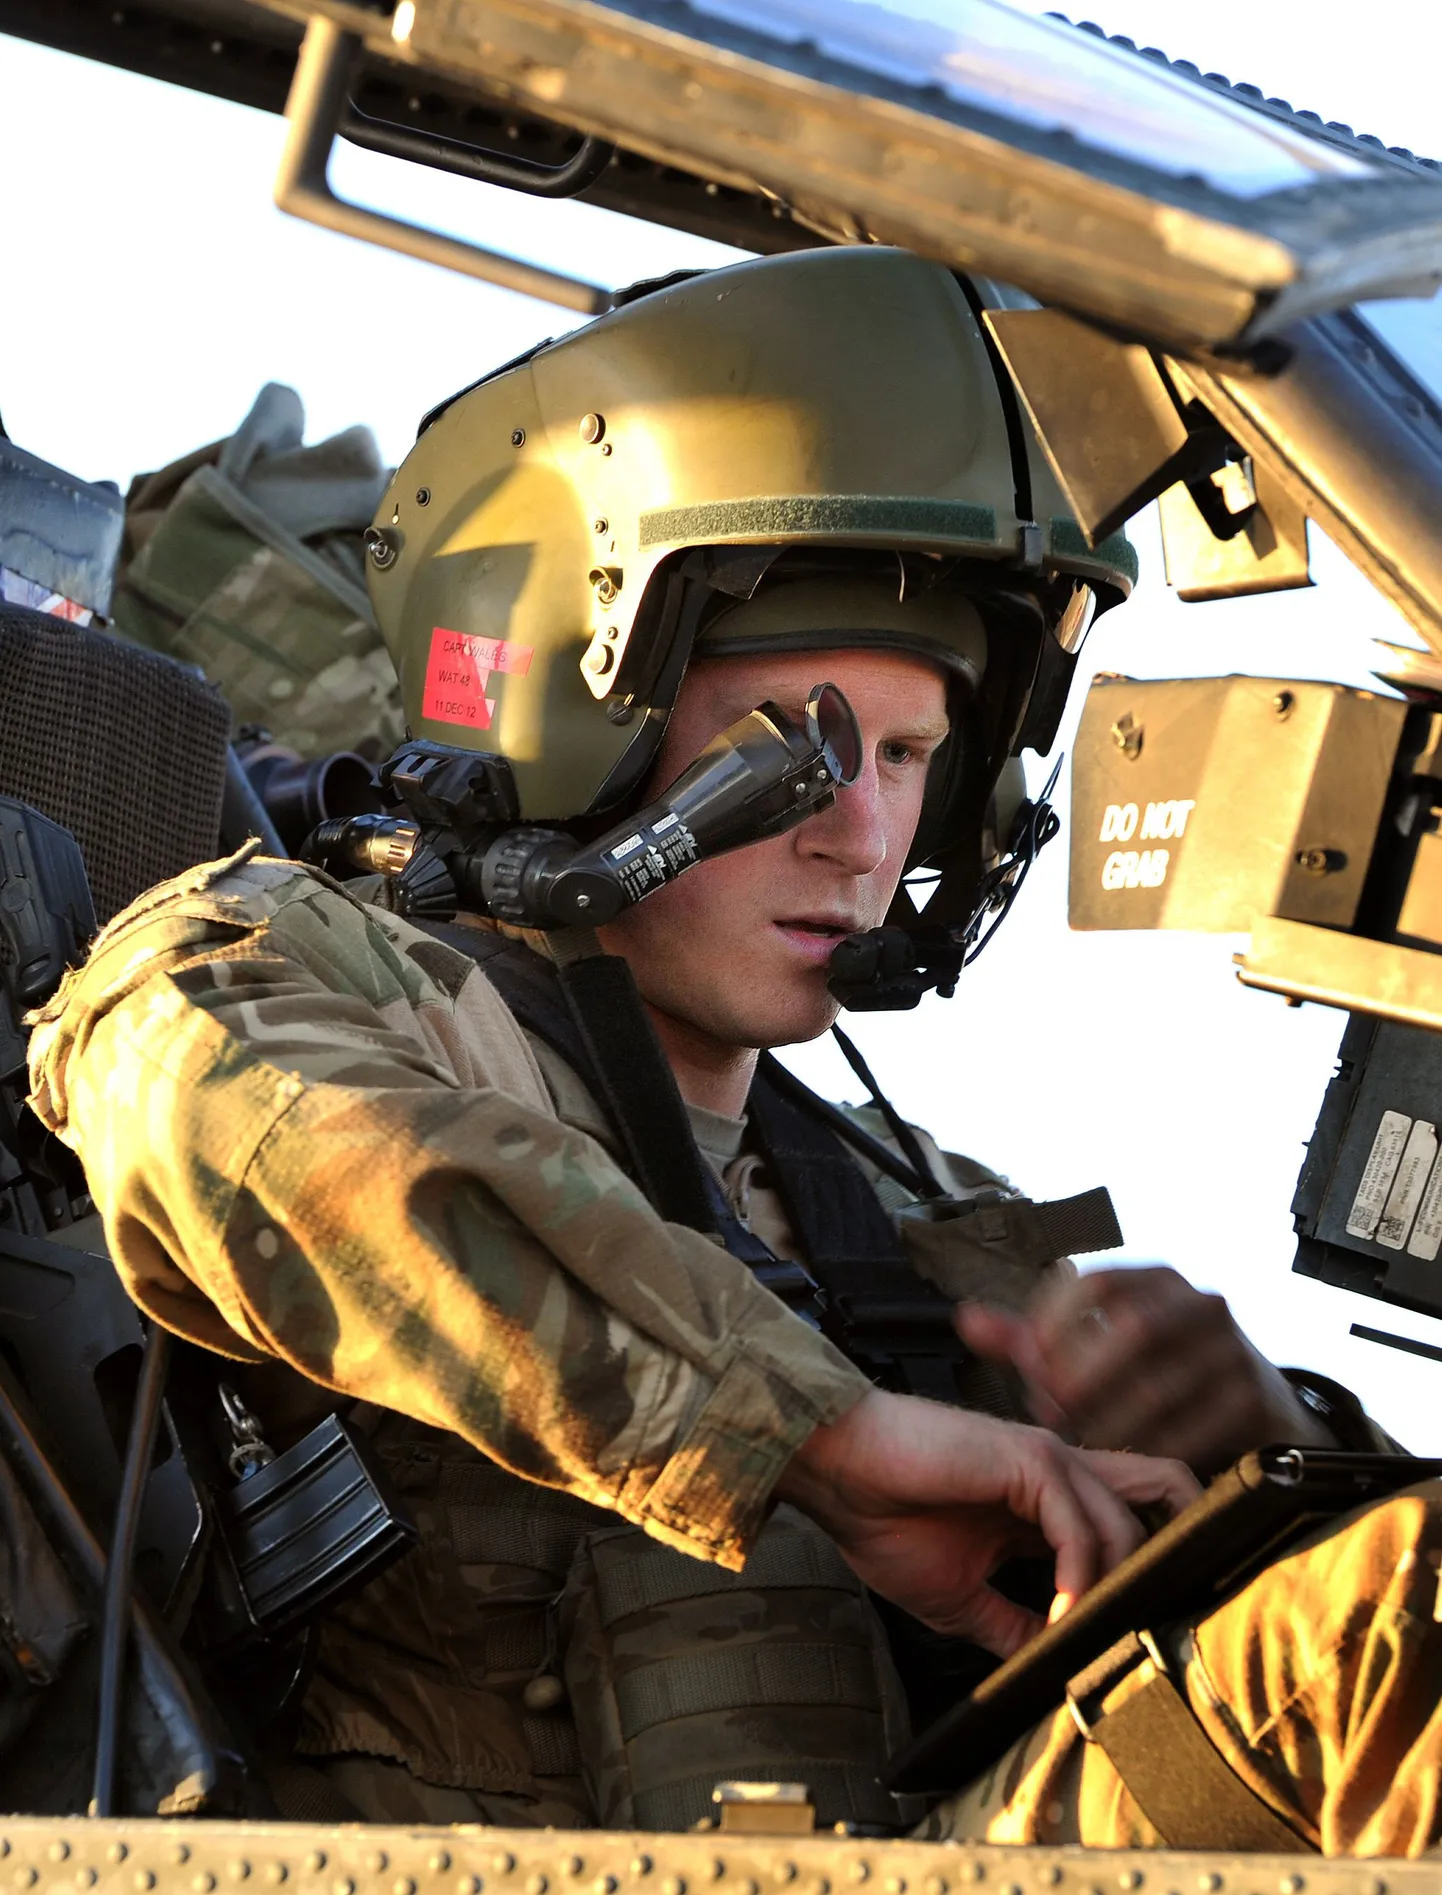 This picture taken on November 2, 2012 shows Britain's Prince Harry wearing his monocle gun sight as he sits in the front seat of his Apache Helicopter at the British controlled flight-line at Camp Bastion in Afghanistan's Helmand Province, where he was serving as an Apache Helicopter Pilot/Gunner with 662 Sqd Army Air Corps. Britain's Prince Harry confirmed he killed Taliban fighters during his stint as a helicopter gunner in Afghanistan, it can be reported after he completed his tour of duty on January 21, 2013.  AFP PHOTO / POOL / JOHN STILLWELL